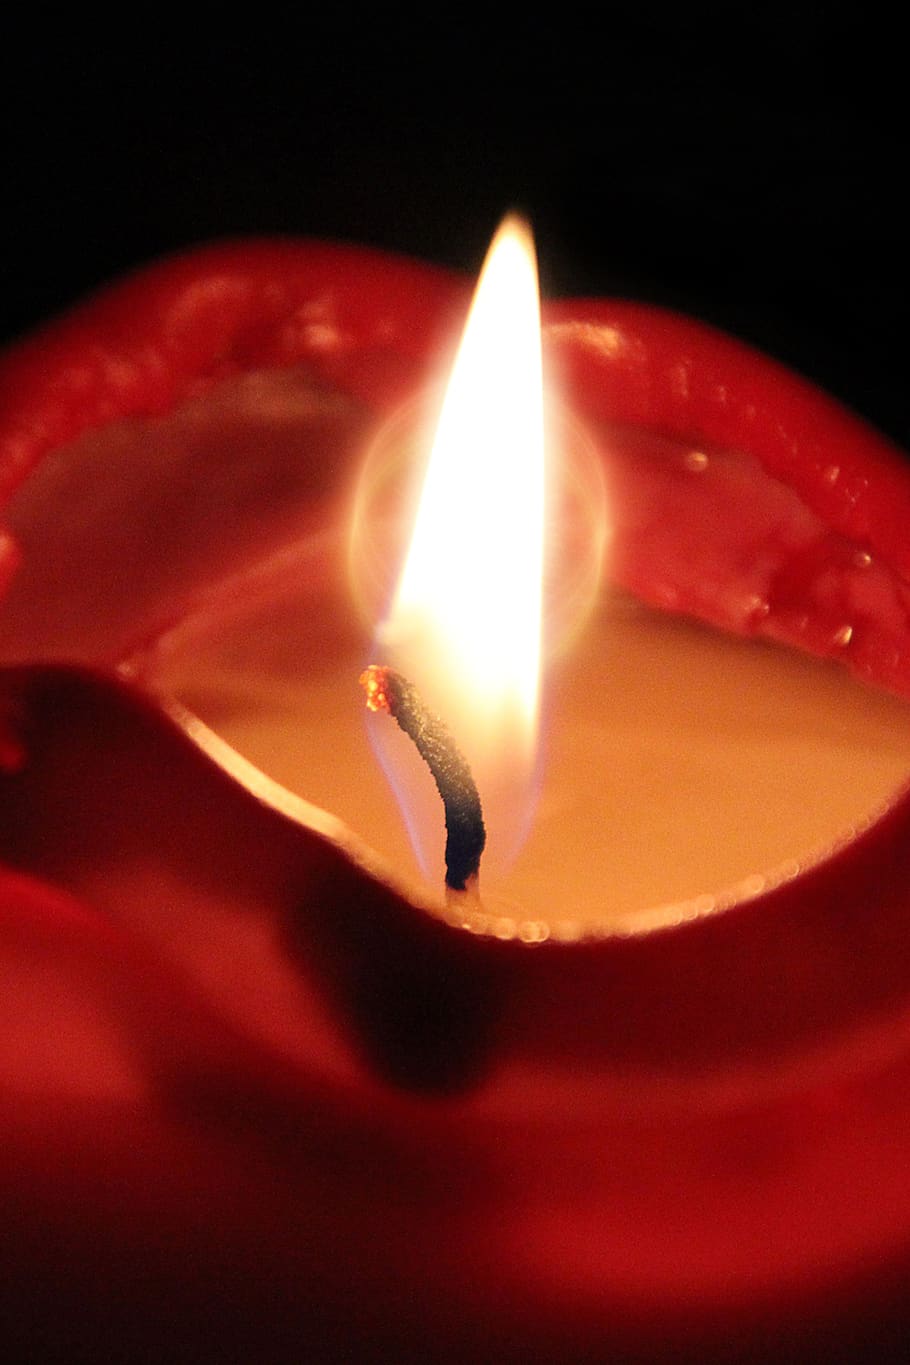 candle, candlelight, flame, light, mood, romance, burning, fire, heat - temperature, fire - natural phenomenon